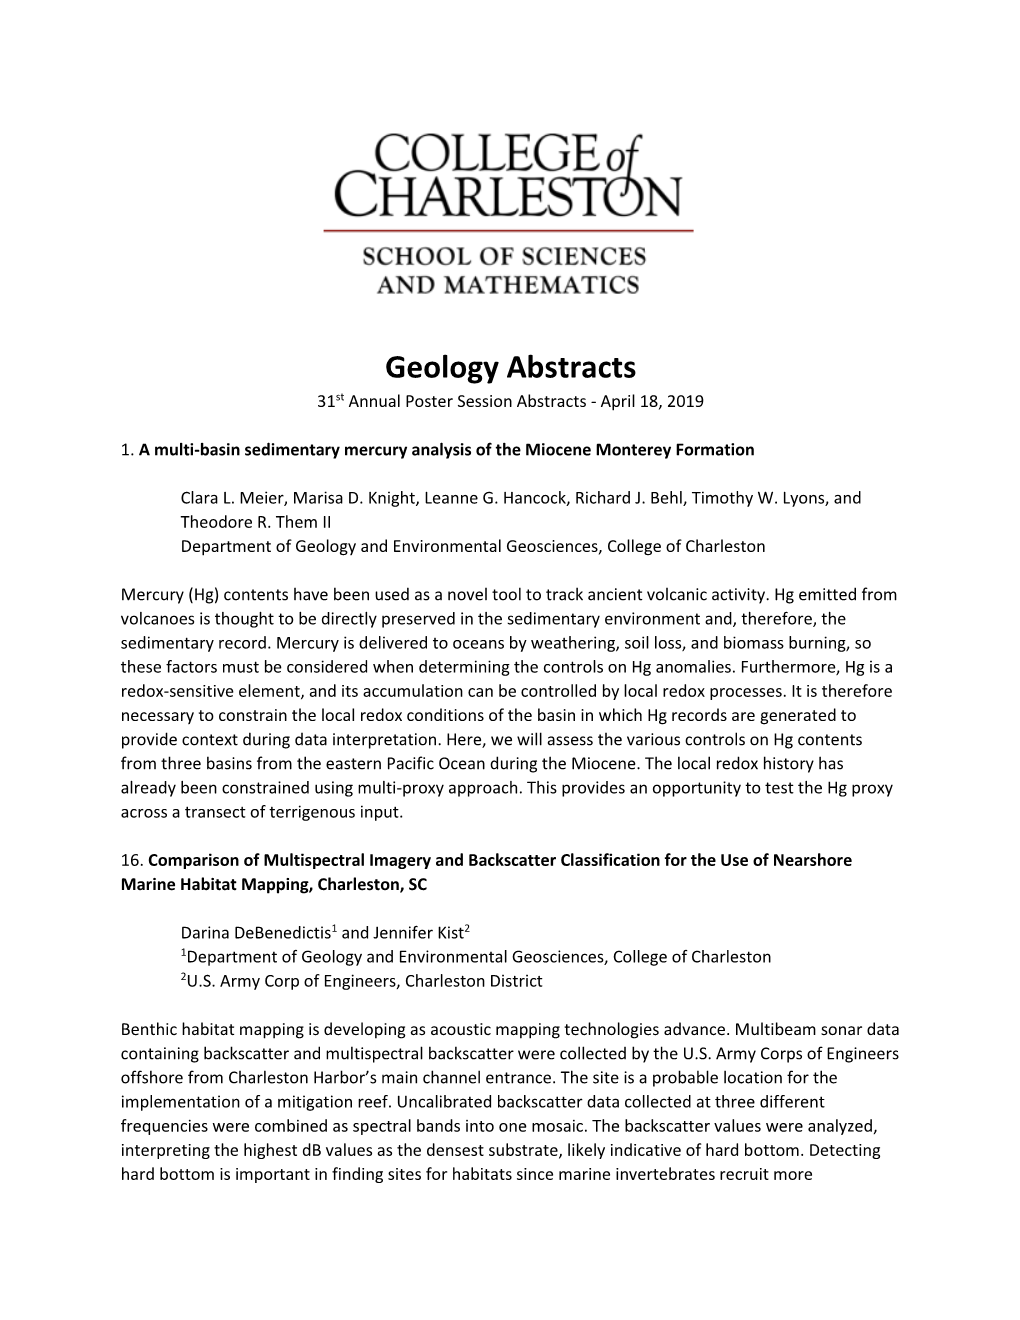 Geology Abstracts 31St Annual Poster Session Abstracts - April 18, 2019